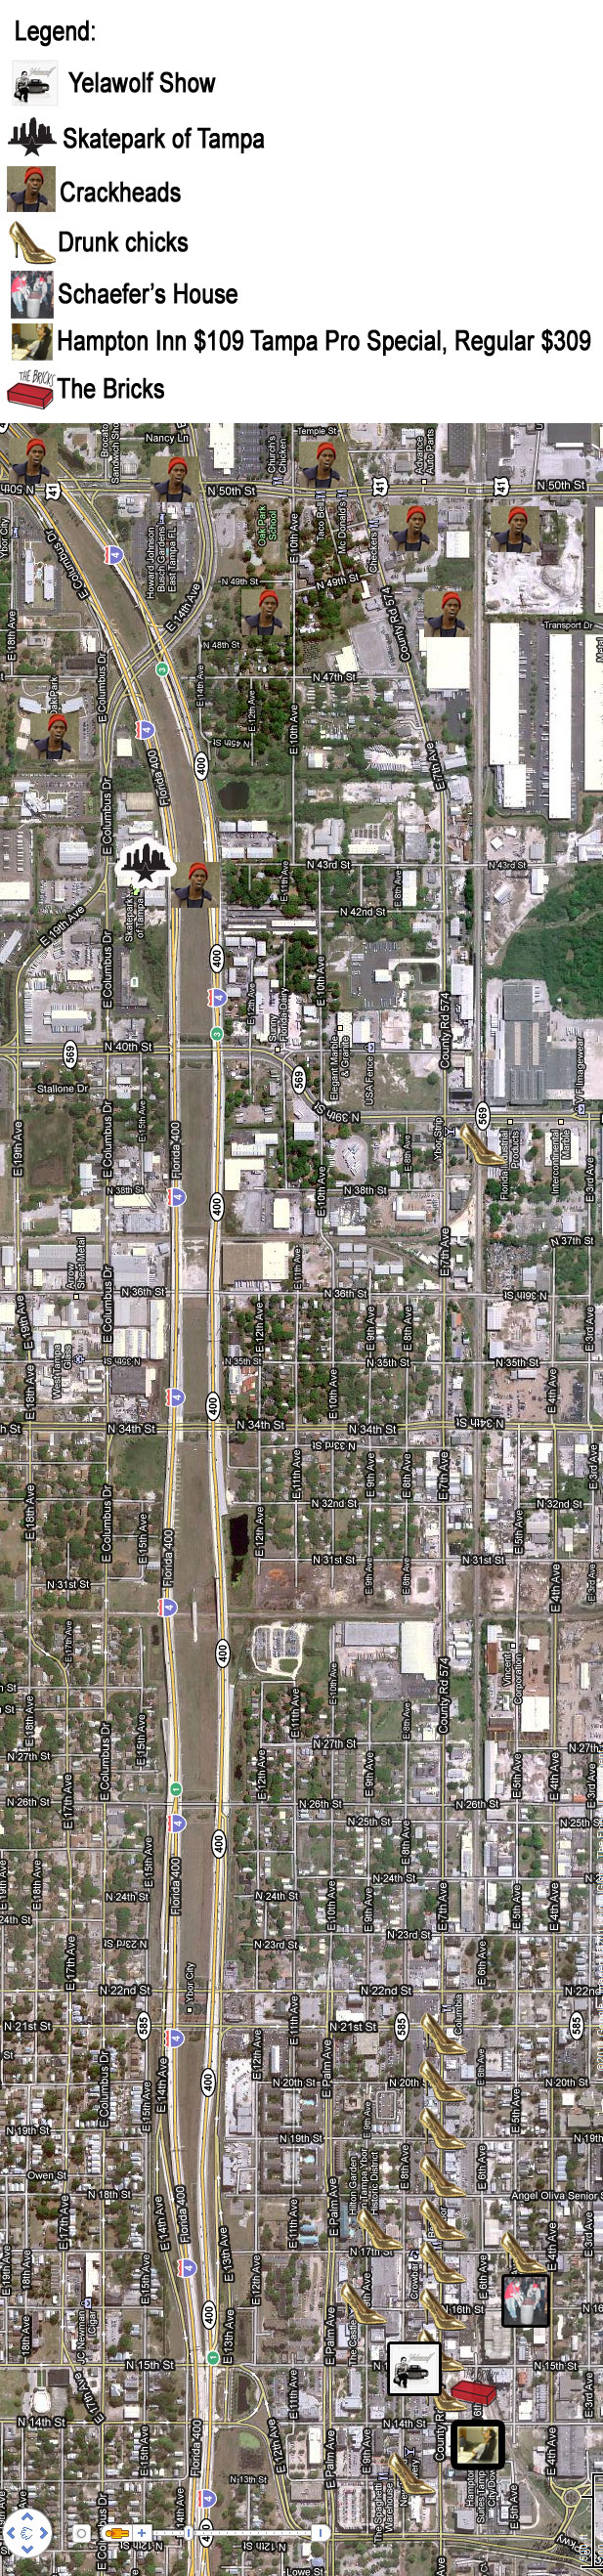 special edition Google Maps of Tampa